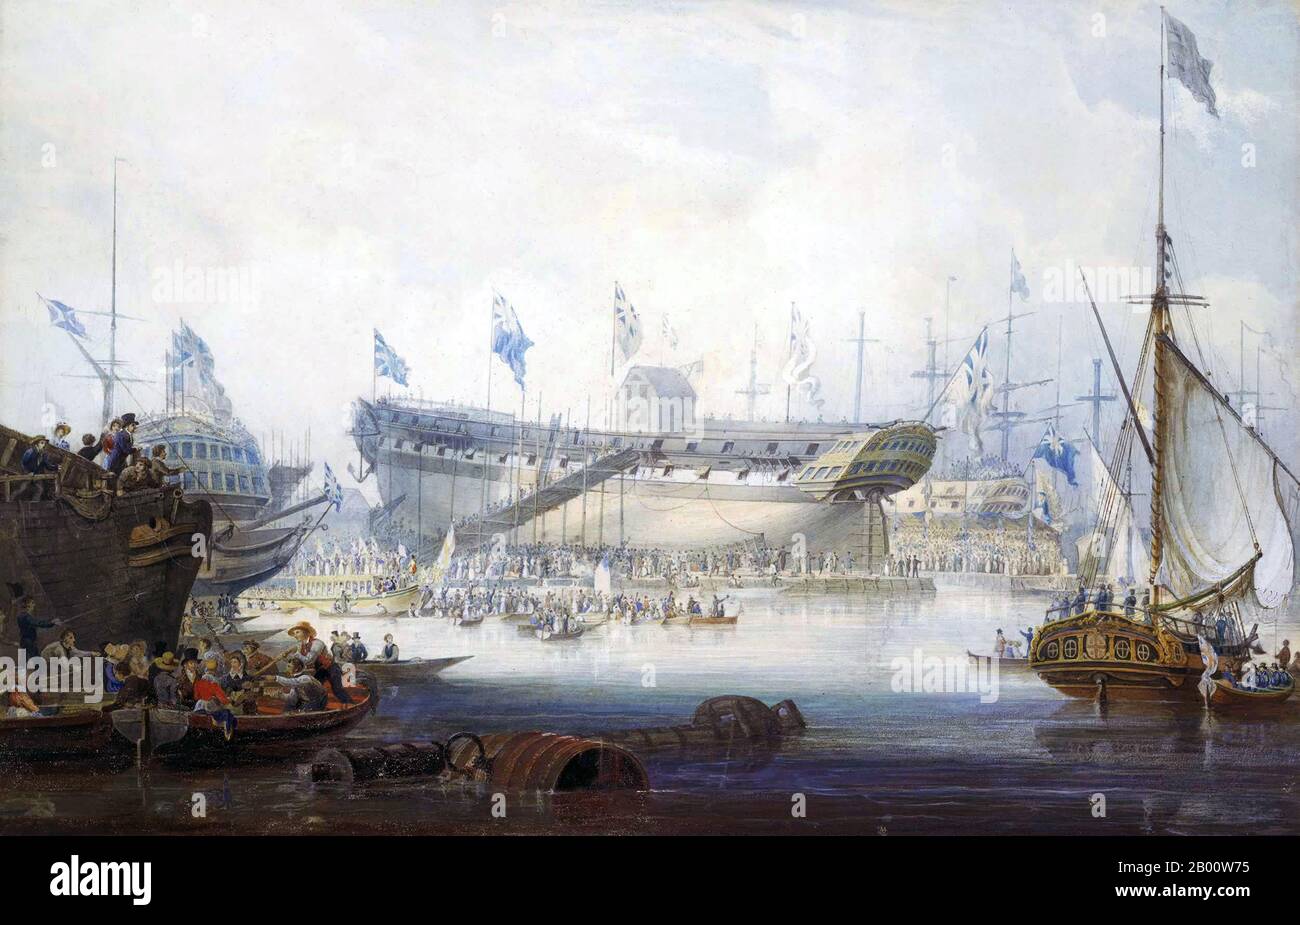 Maritime: 'The launch of the Honourable East India Company ship 'Edinburgh''. Watercolour painting by William John Huggins (1781-1845), c. 1825.  William John Huggins (1781 - 19 May 1845) was a British marine painter who spent time as an ordinary seaman, making one voyage to India and China  betwen December 1812 and August 1814 on an East Indiaman. He drew various ships and landscapes during his voyage, and eventually became a professional artist after settling in London, working for the East India Company. Huggins won royal patronage for his work. Stock Photo